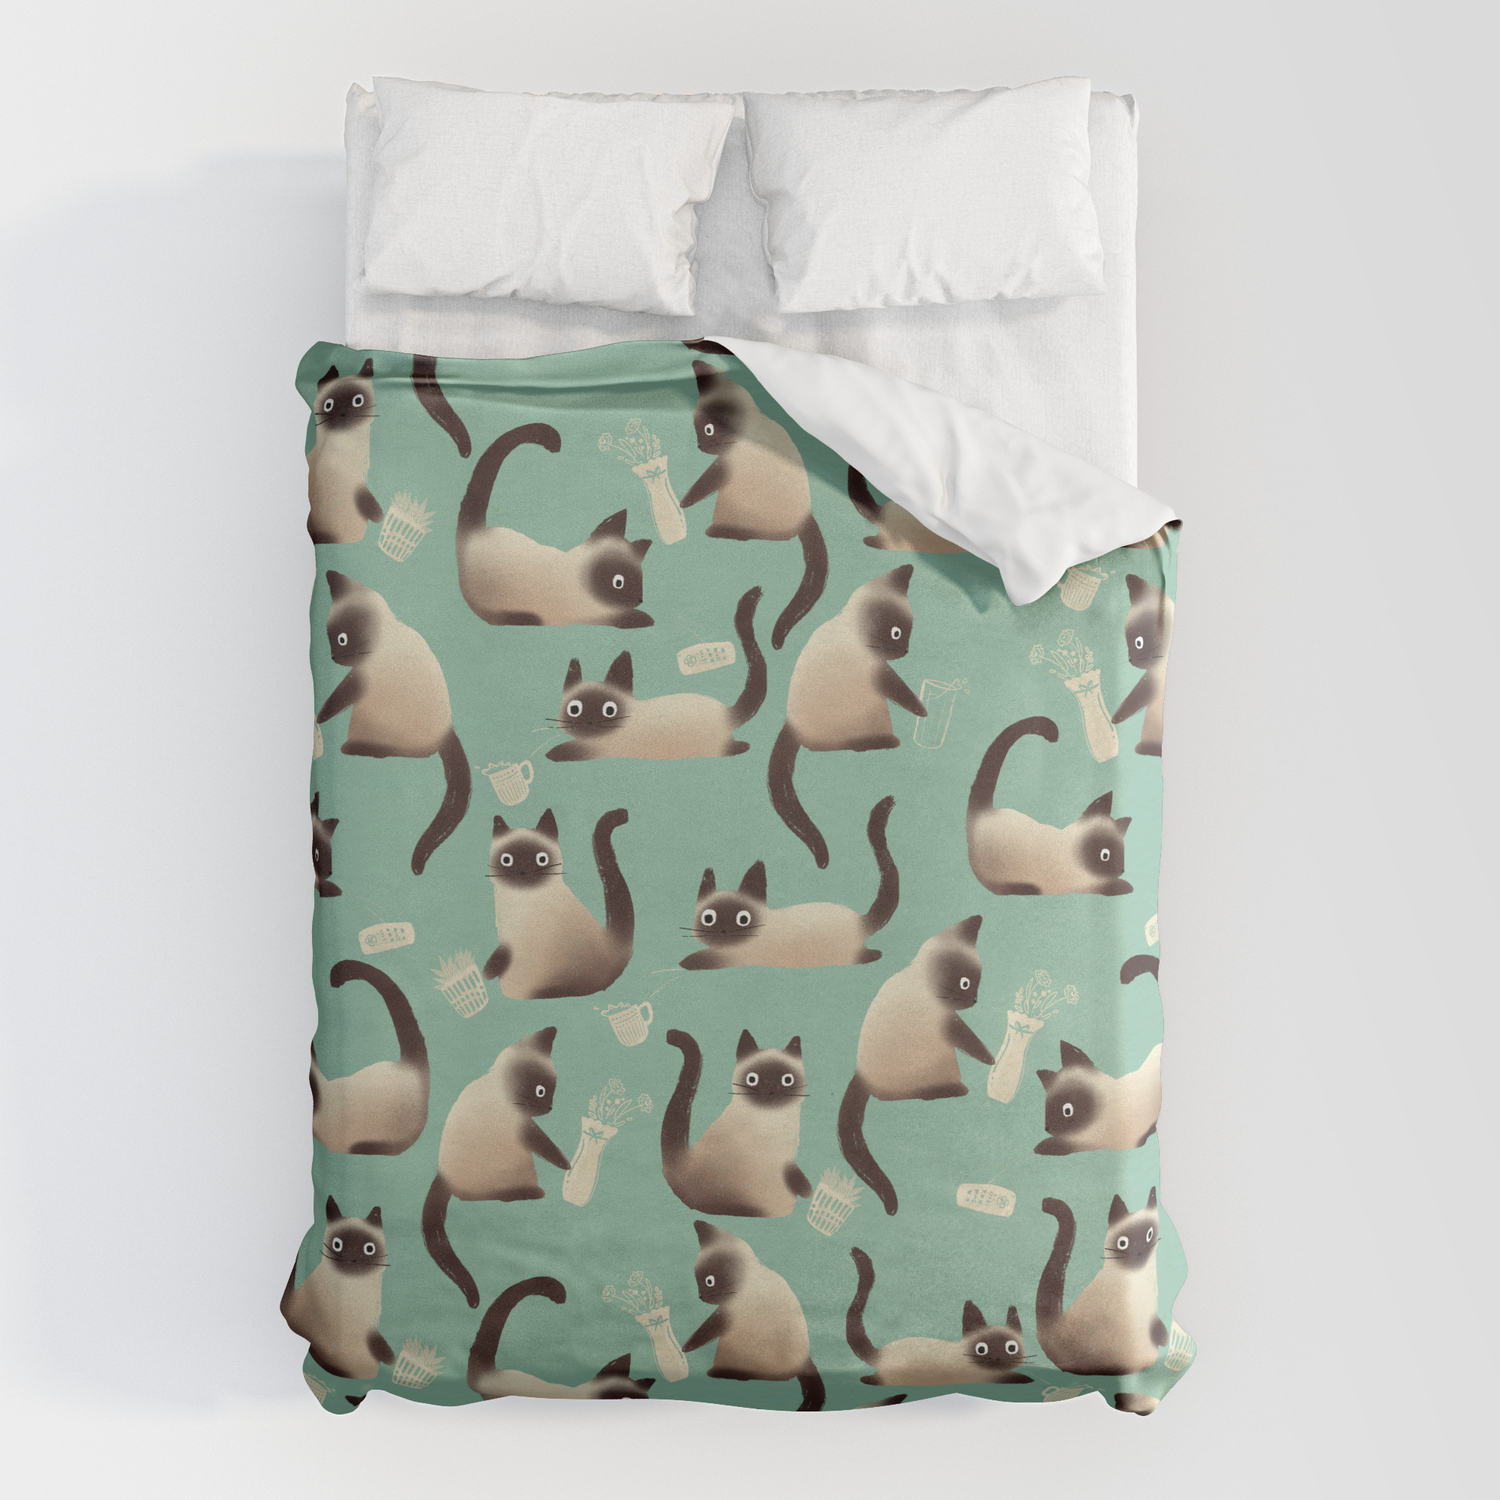 Bad Siamese Cats Knocking Stuff Over, How Do You Stuff A Duvet Cover